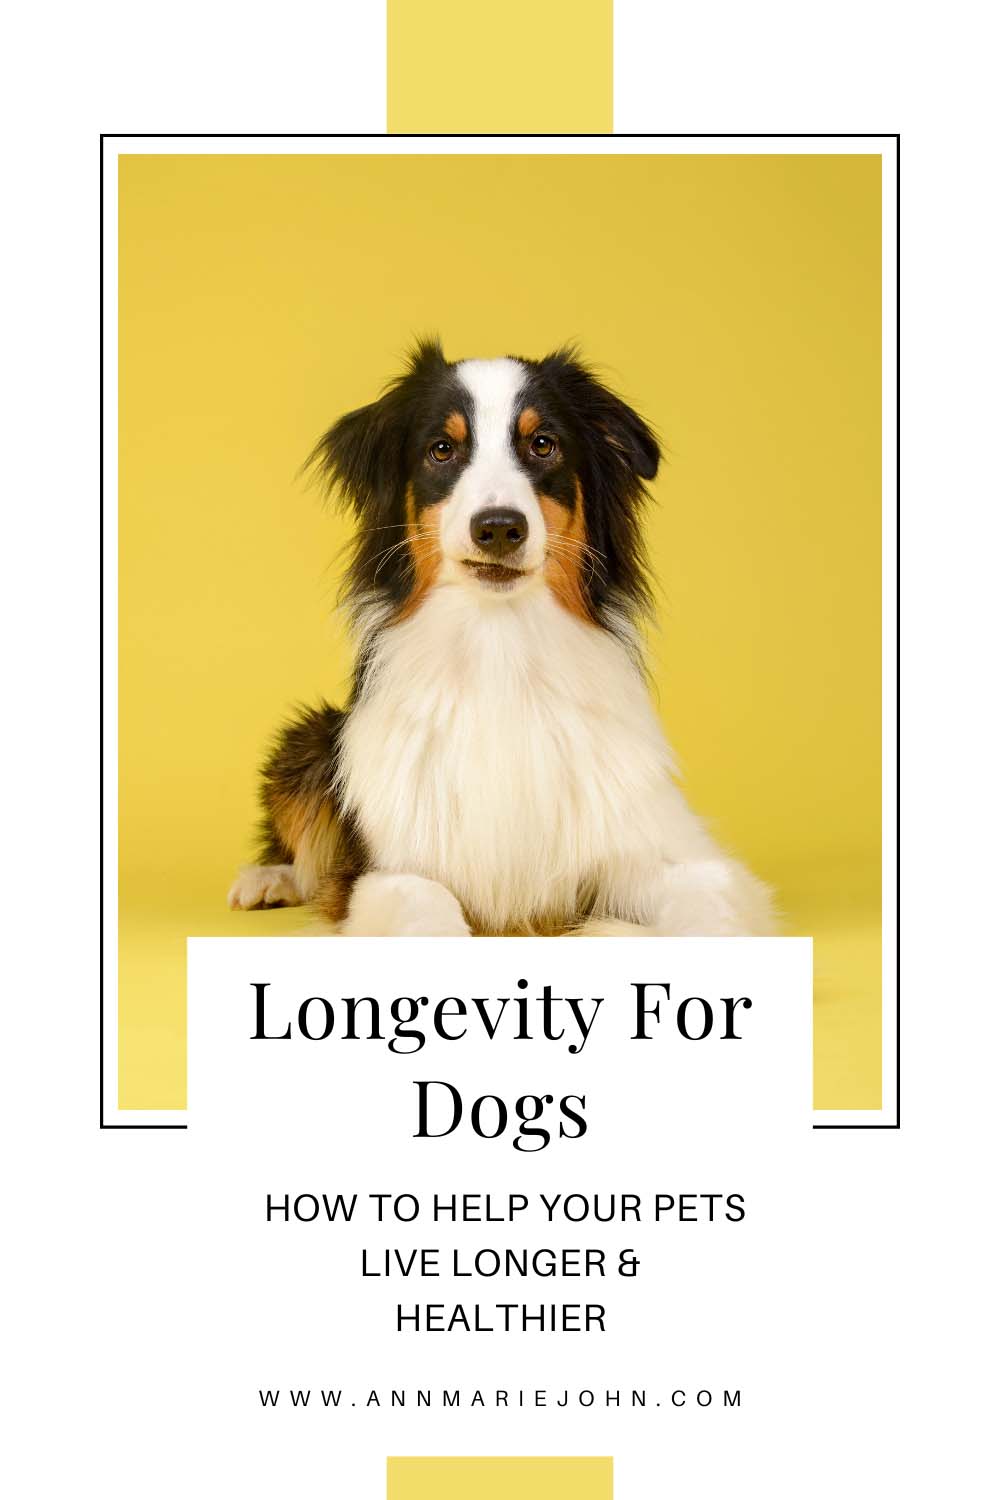 Longevity For Dogs: How To Help Your Pets Live Longer & Healthier